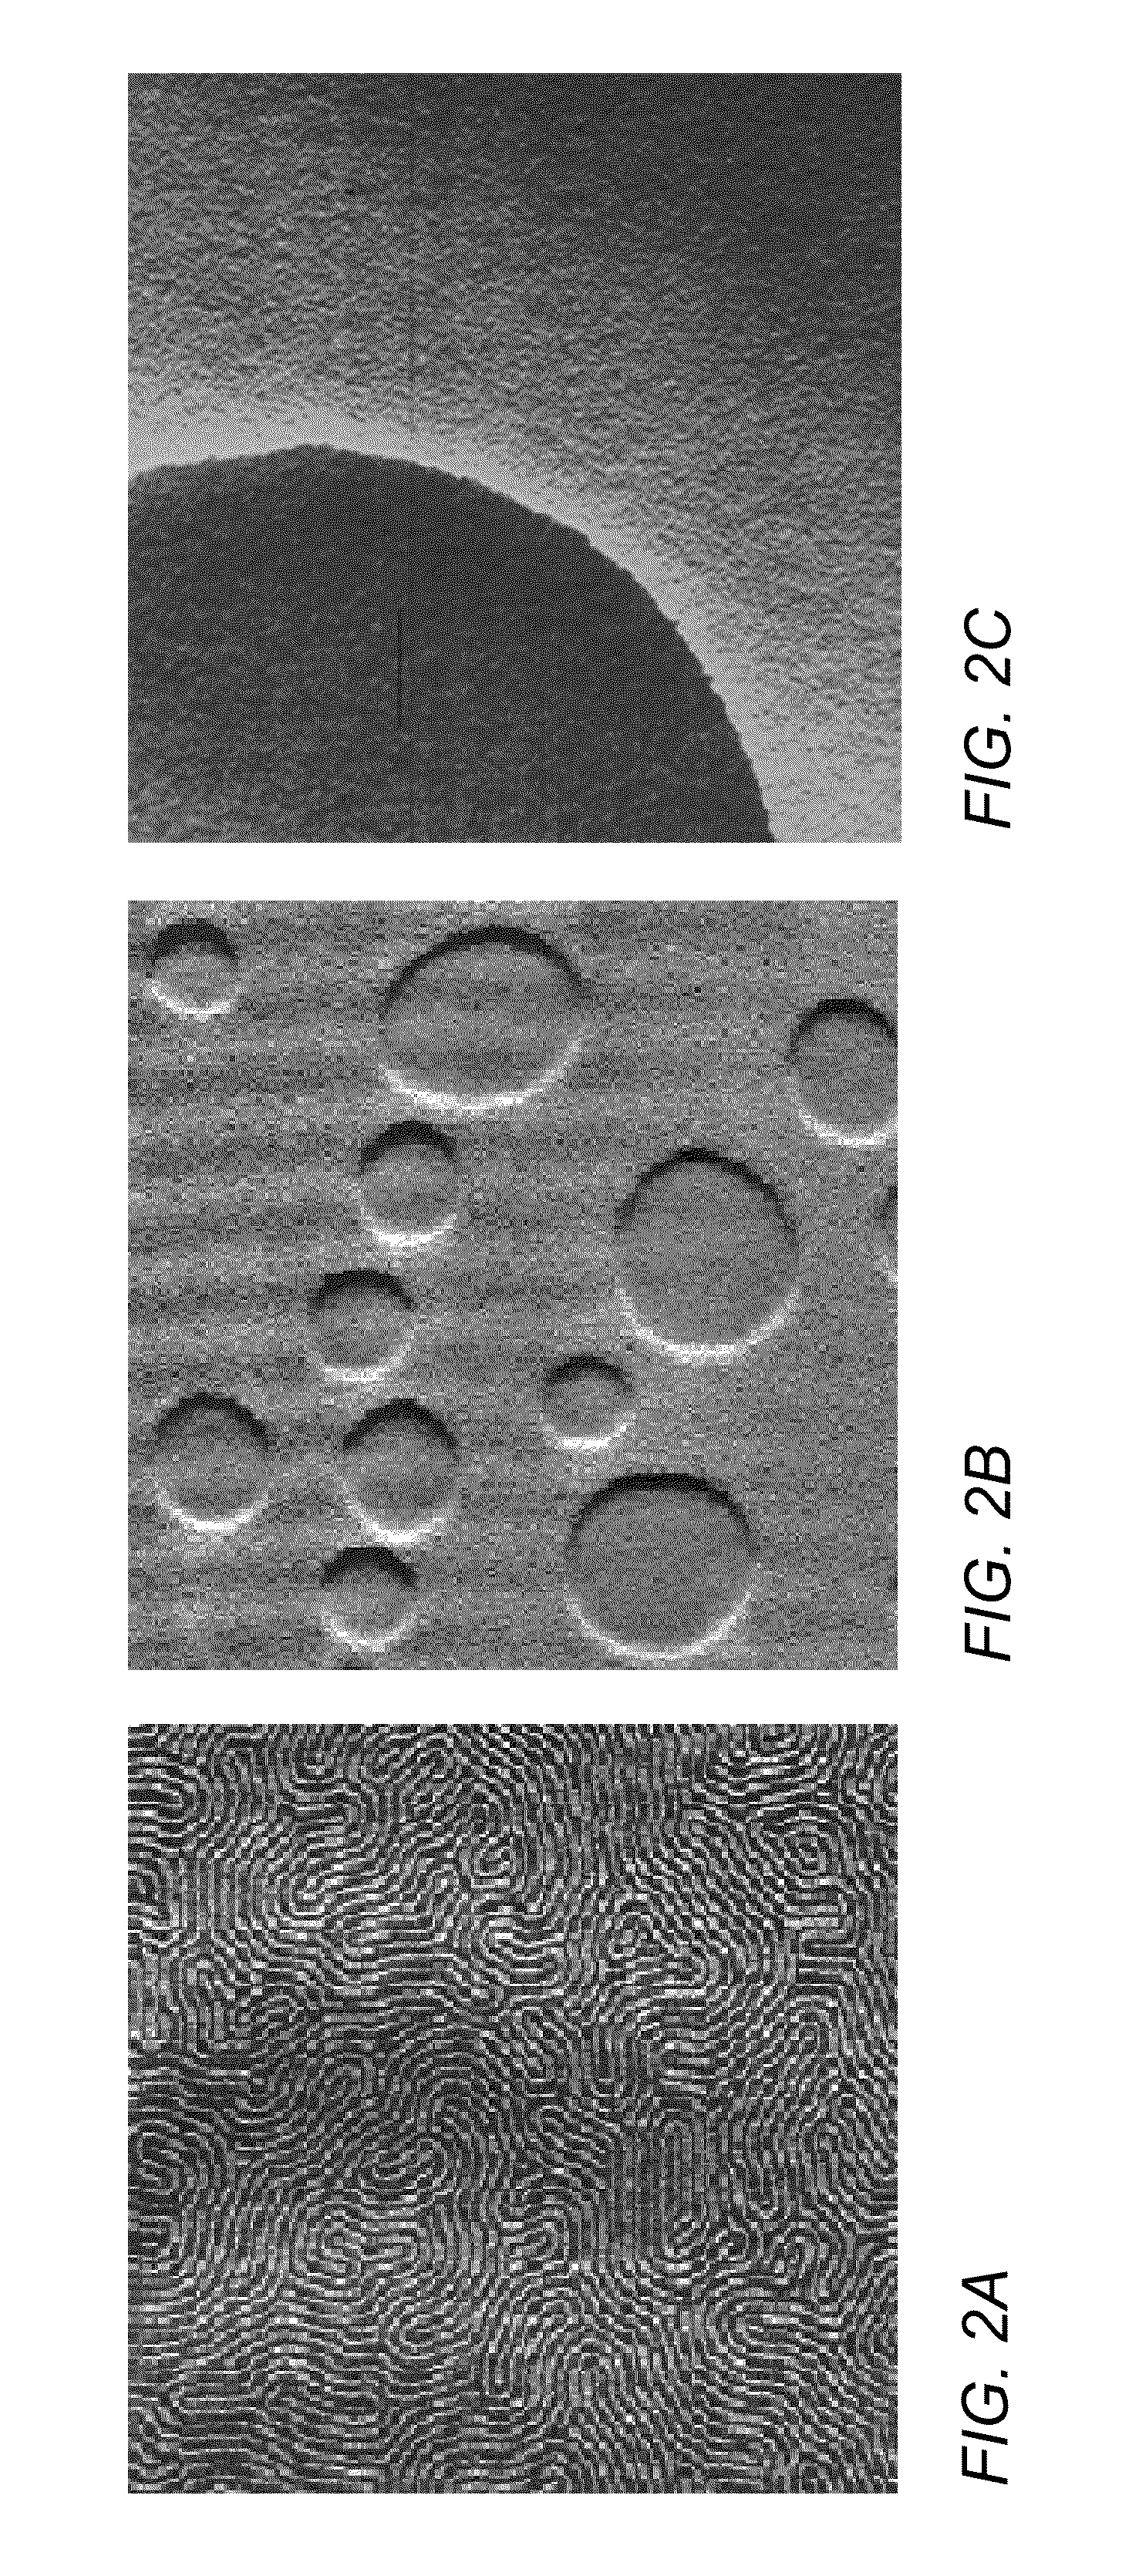 Directed self-assembly pattern formation methods and compositions